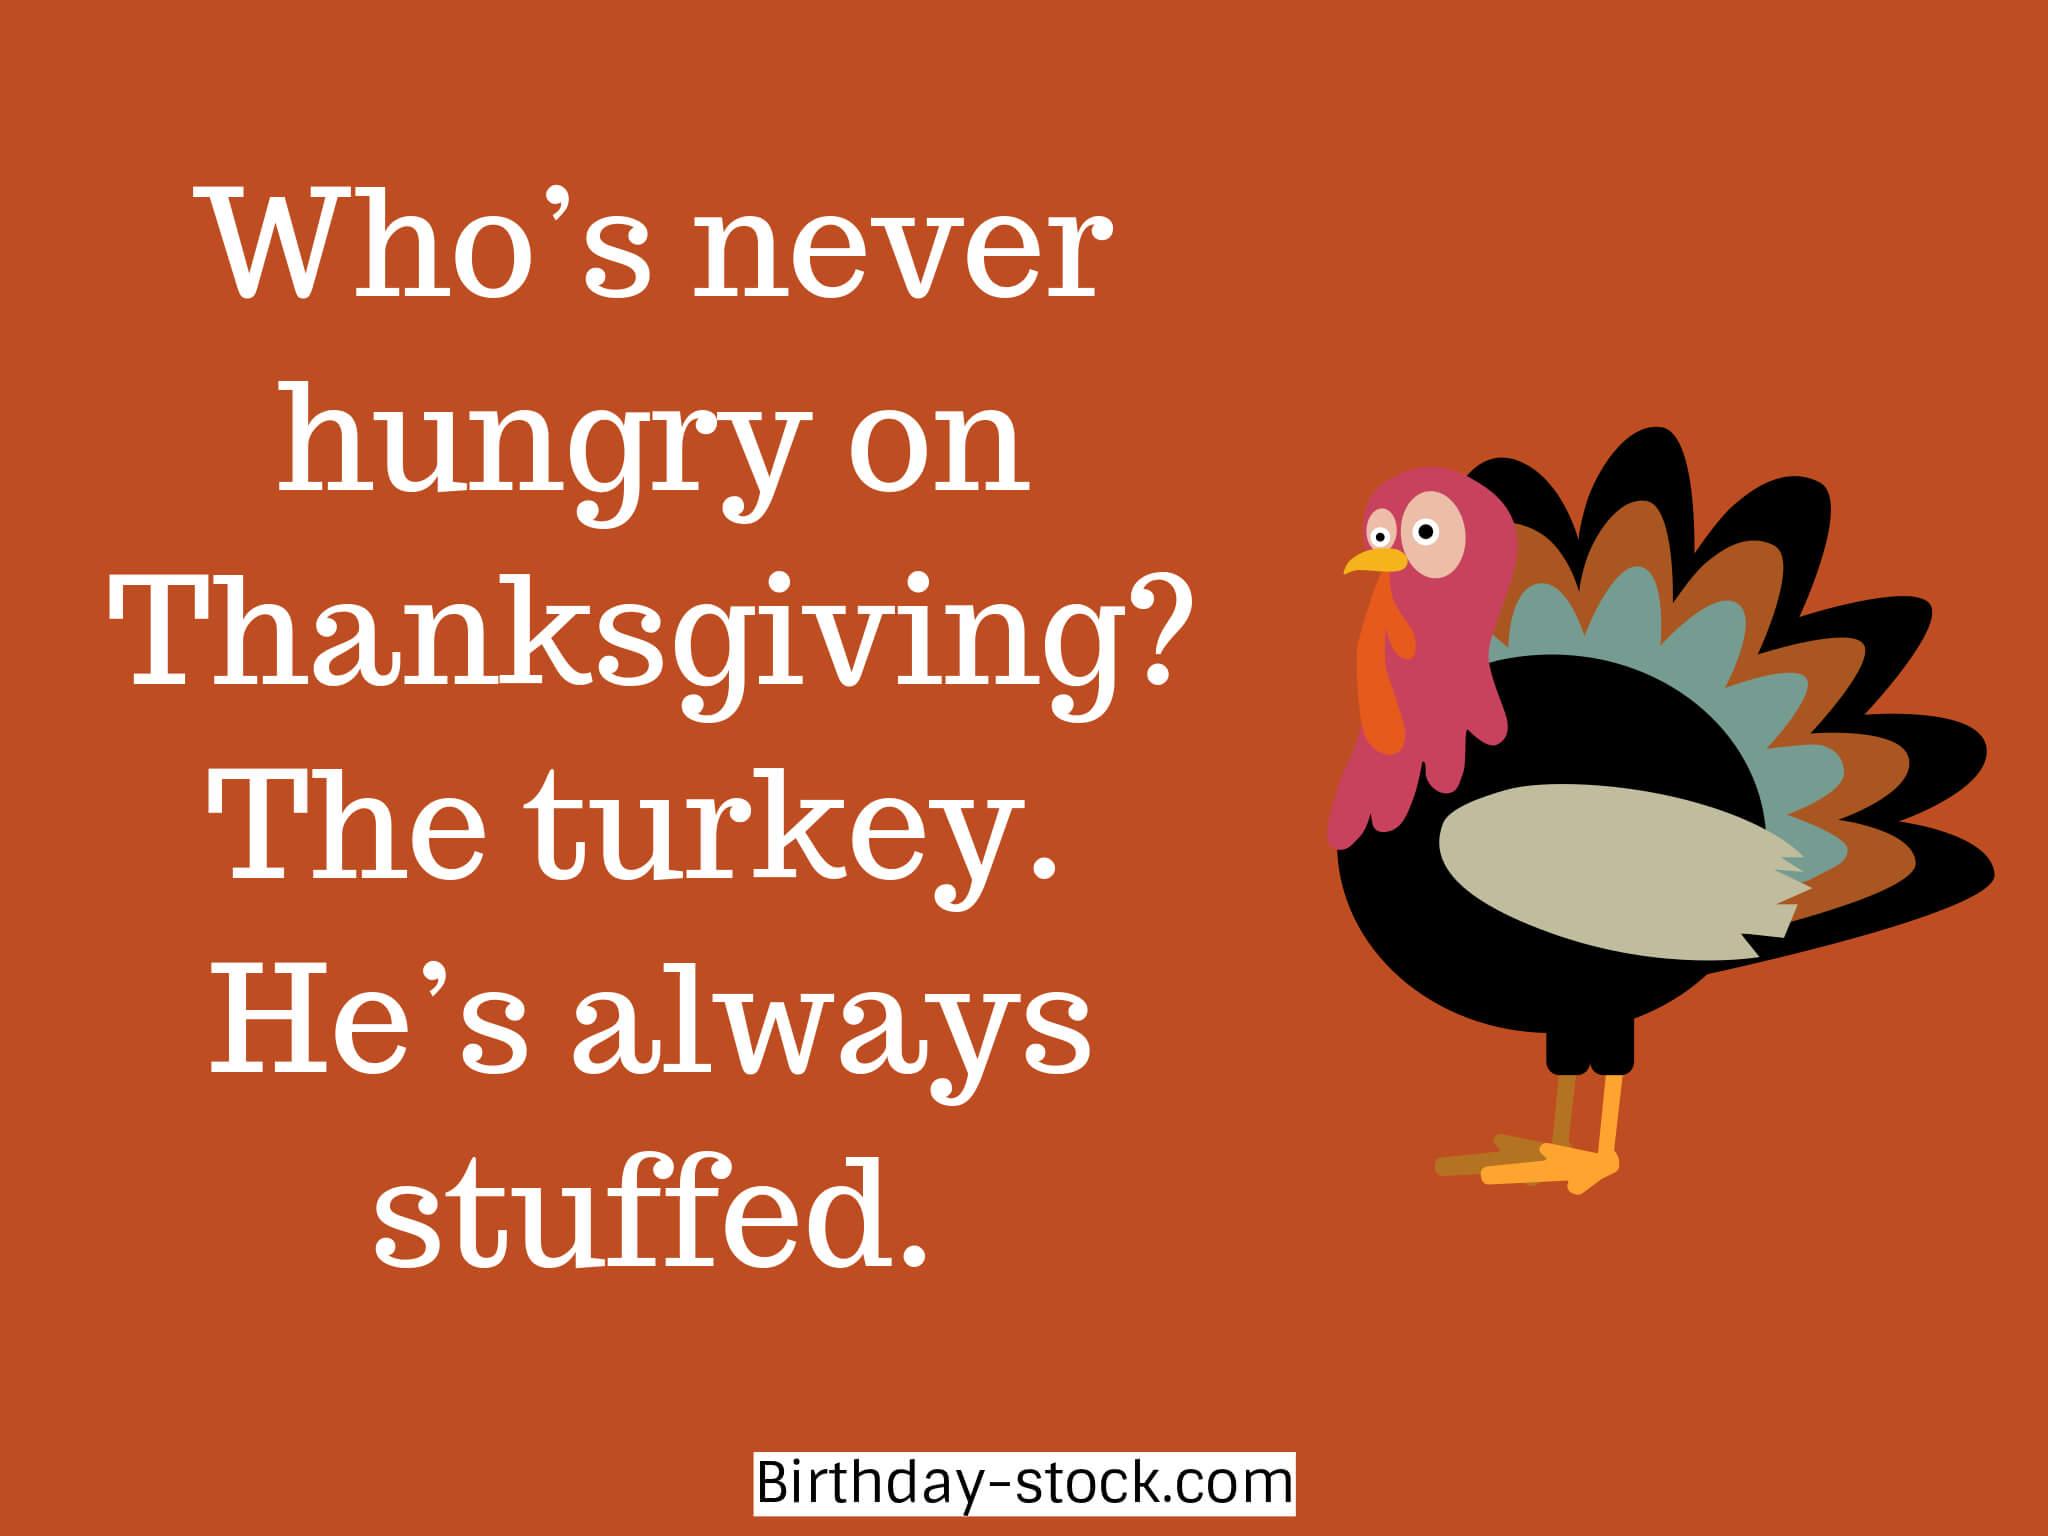 Funny Turkey Picture Thanksgiving 2019. Cartoon Image 2019